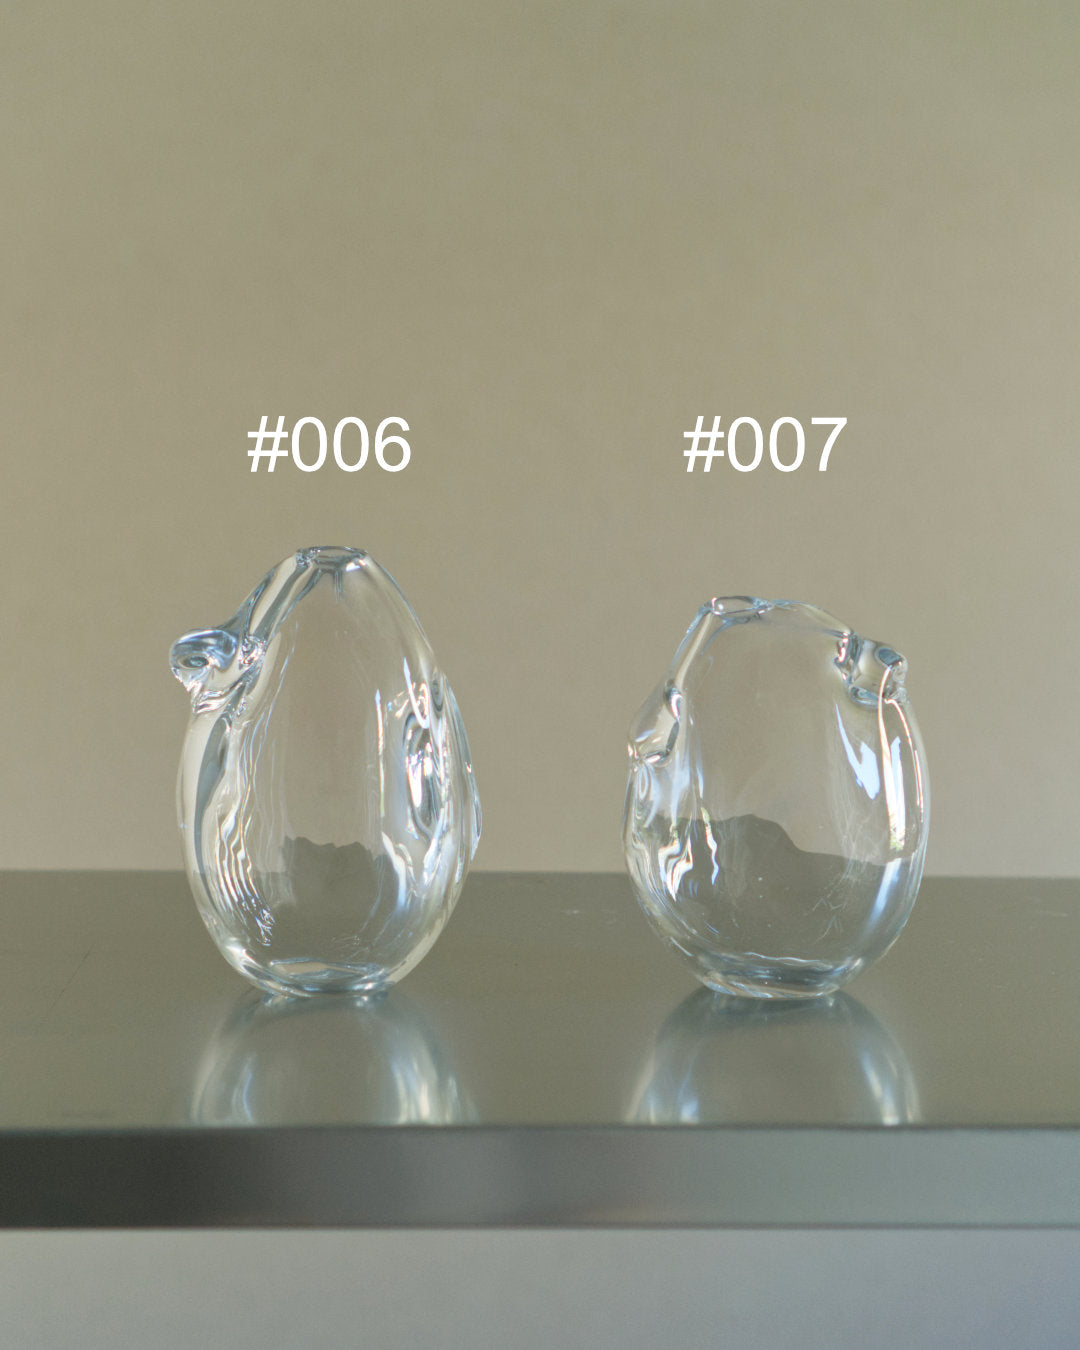 VESSEL FOR WATER #006-#007